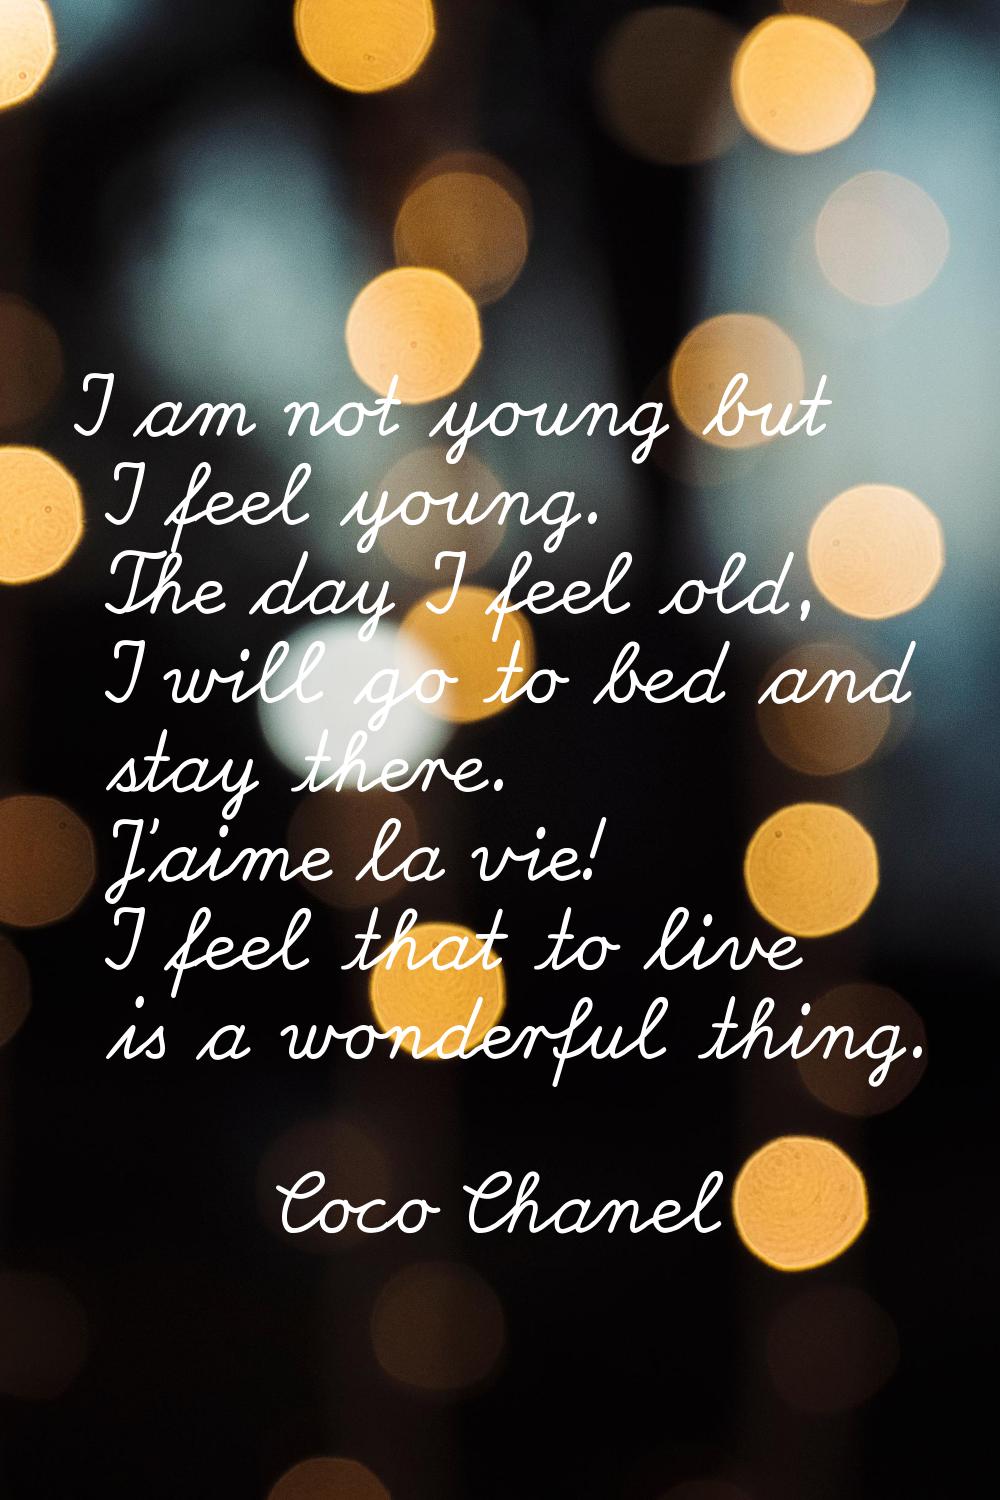 I am not young but I feel young. The day I feel old, I will go to bed and stay there. J'aime la vie